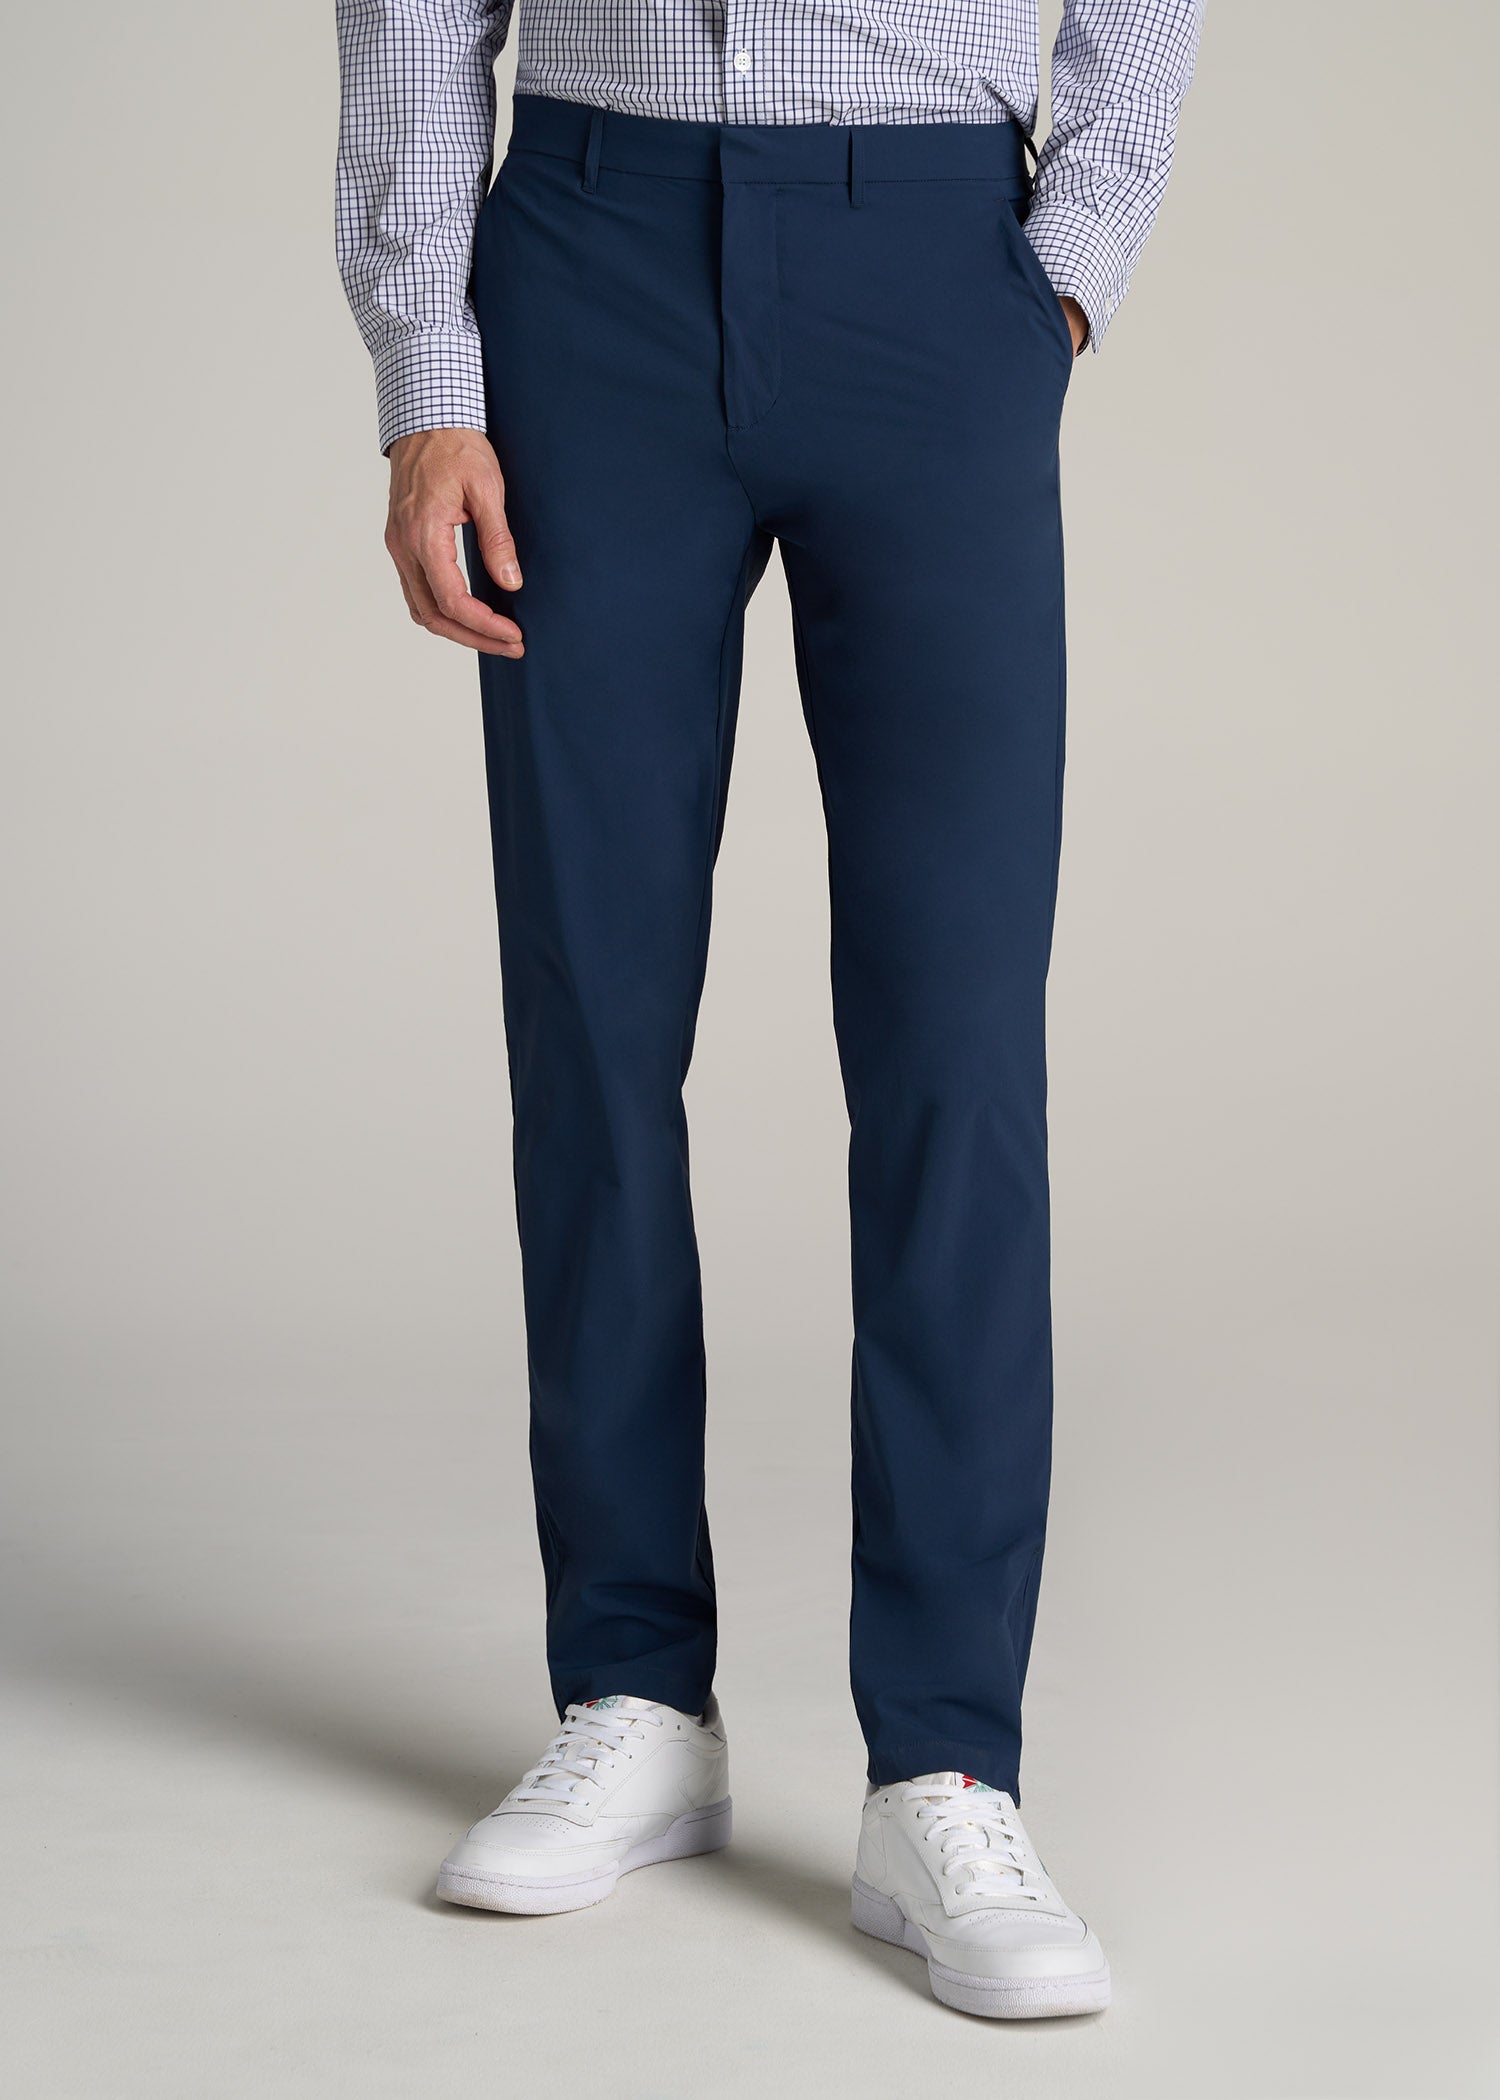 Performance TAPERED-FIT Chino Pants for Tall Men in Marine Navy